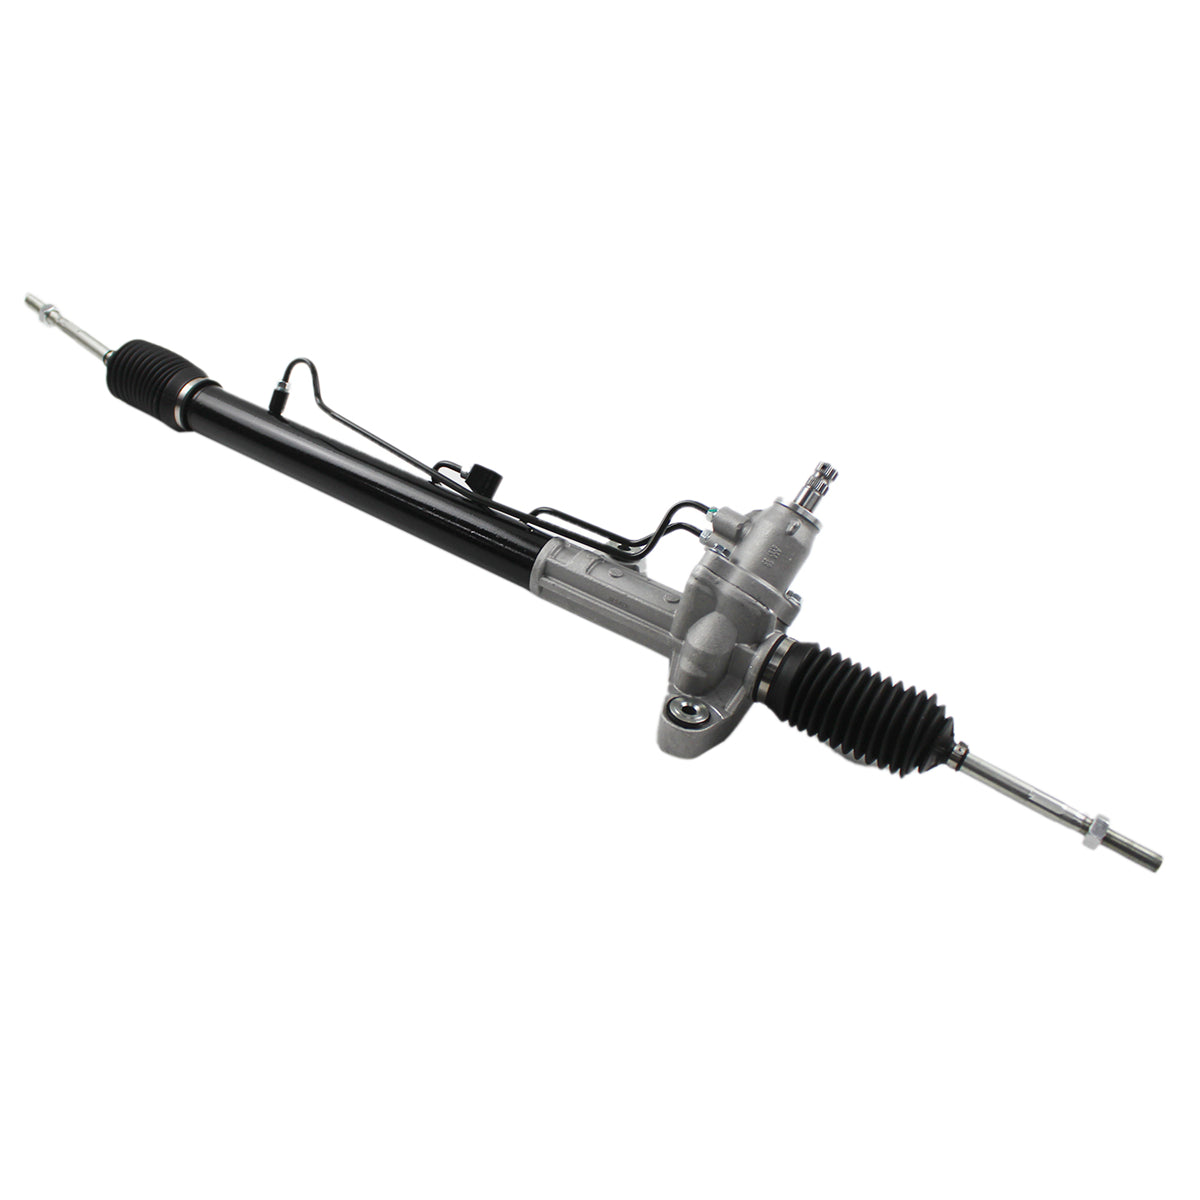 Daysyore® Power Steering Rack and Pinion for Honda CR-V 1997-2001 26-1776 53601S10A01 53601S10A02 53601S10A03